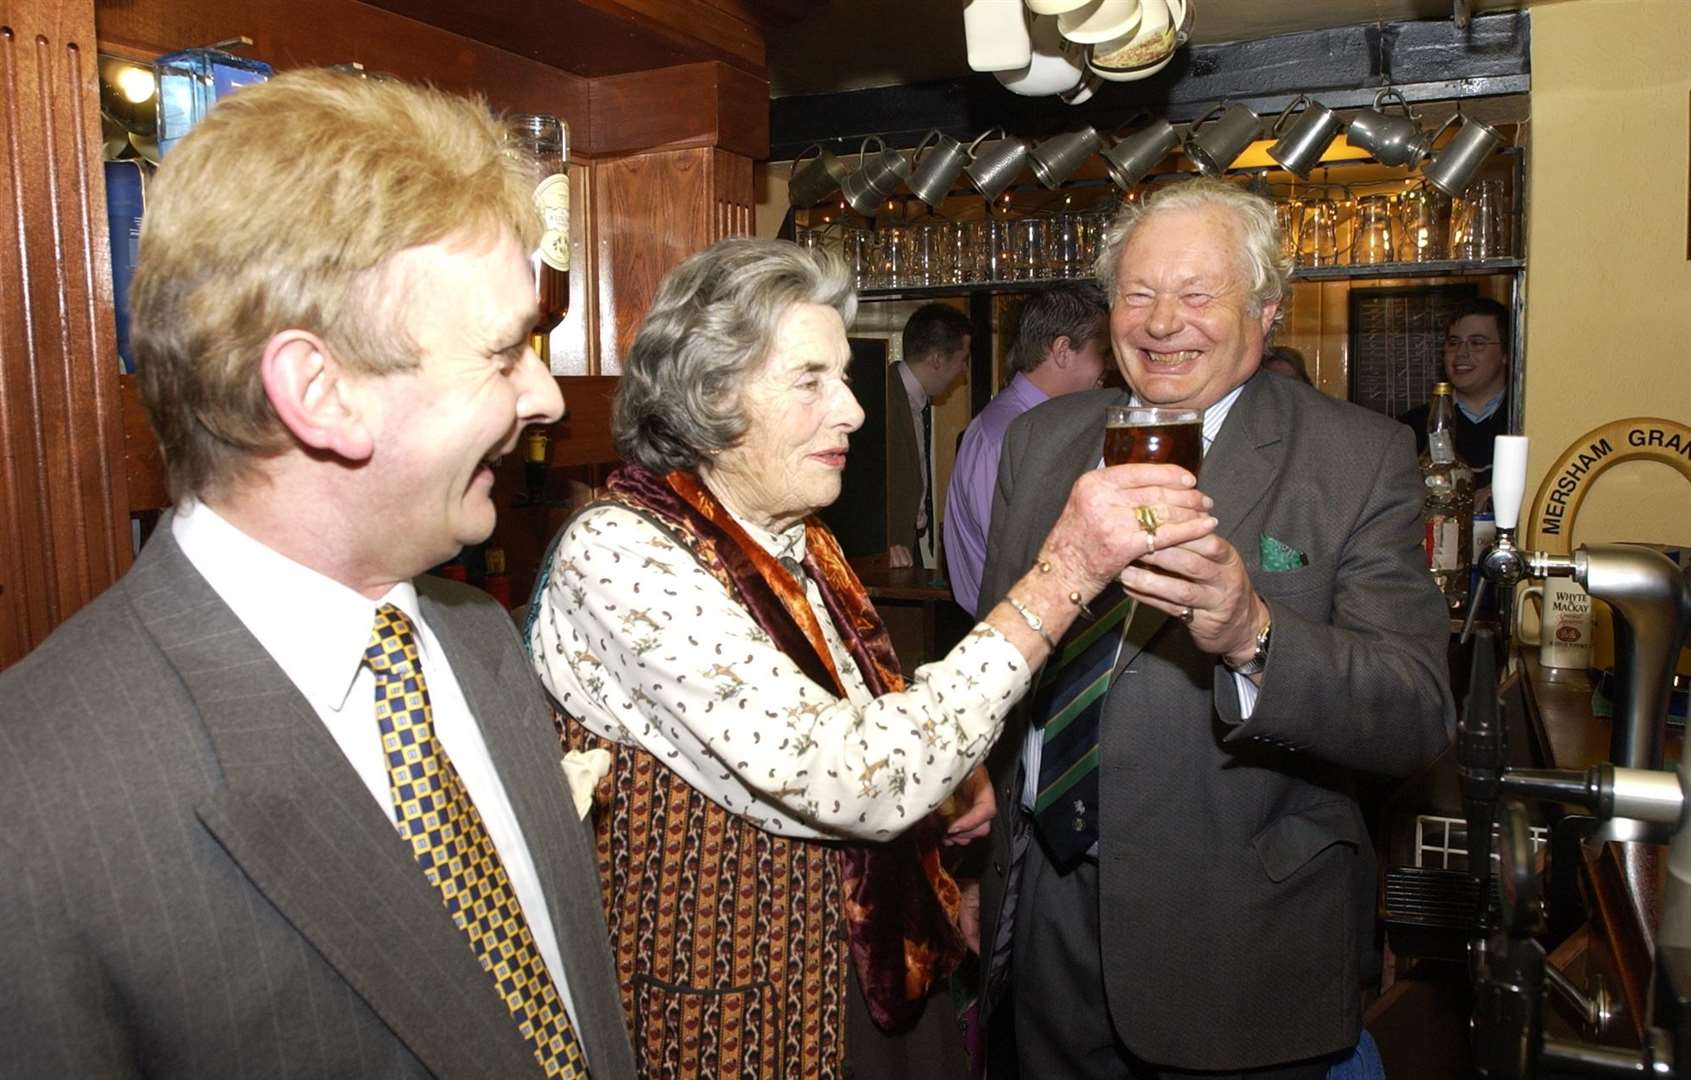 Countess Mountbatten, known locally as Lady Brabourne, pulled a pint when she reopened the Royal Oak in 2002, pictured with then-landlord Ian Cook and Robert Neame